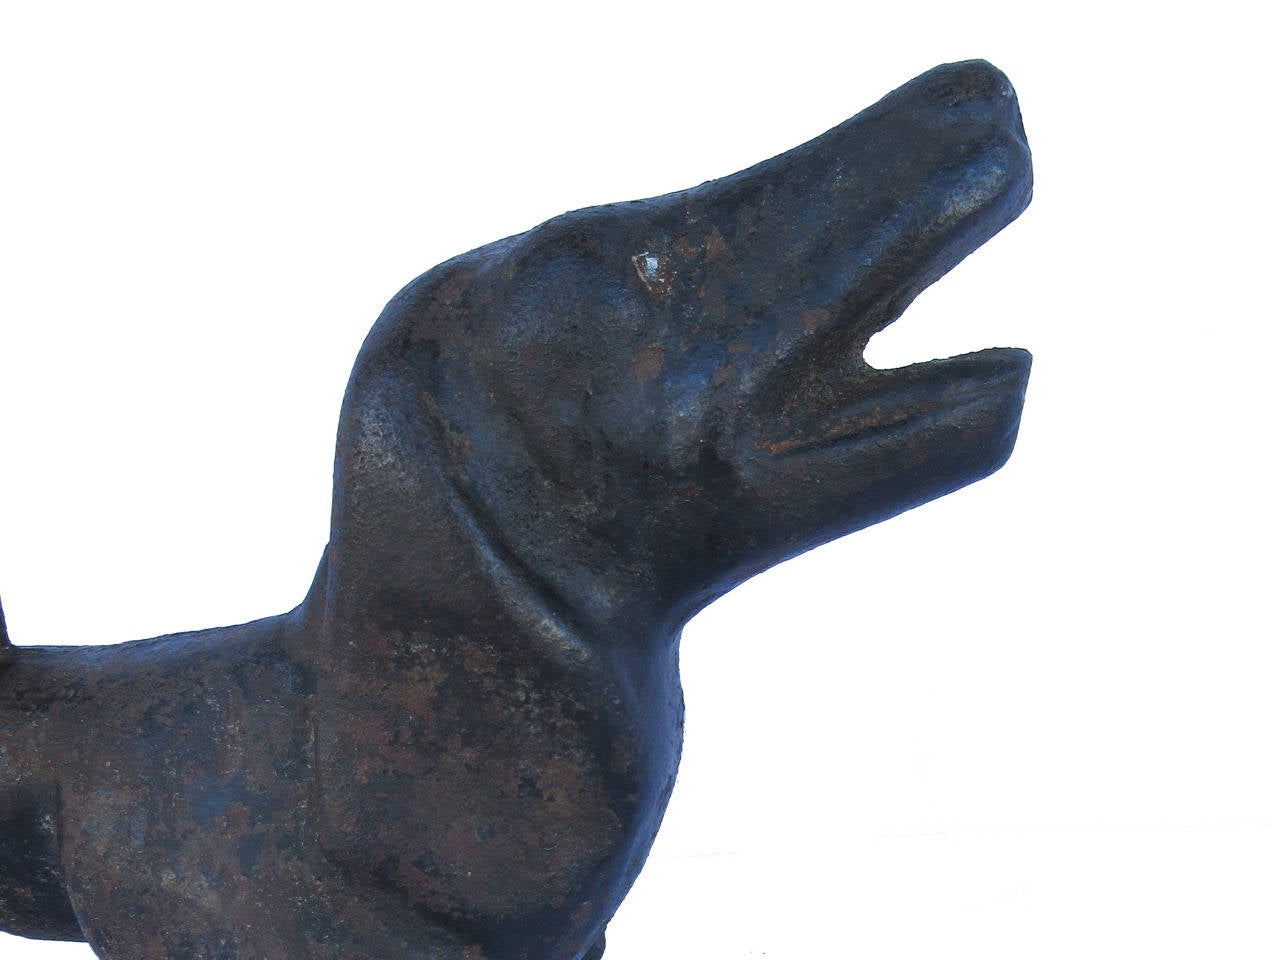 Cast iron dachshund boot scraper in old black painted surface, circa 1900.